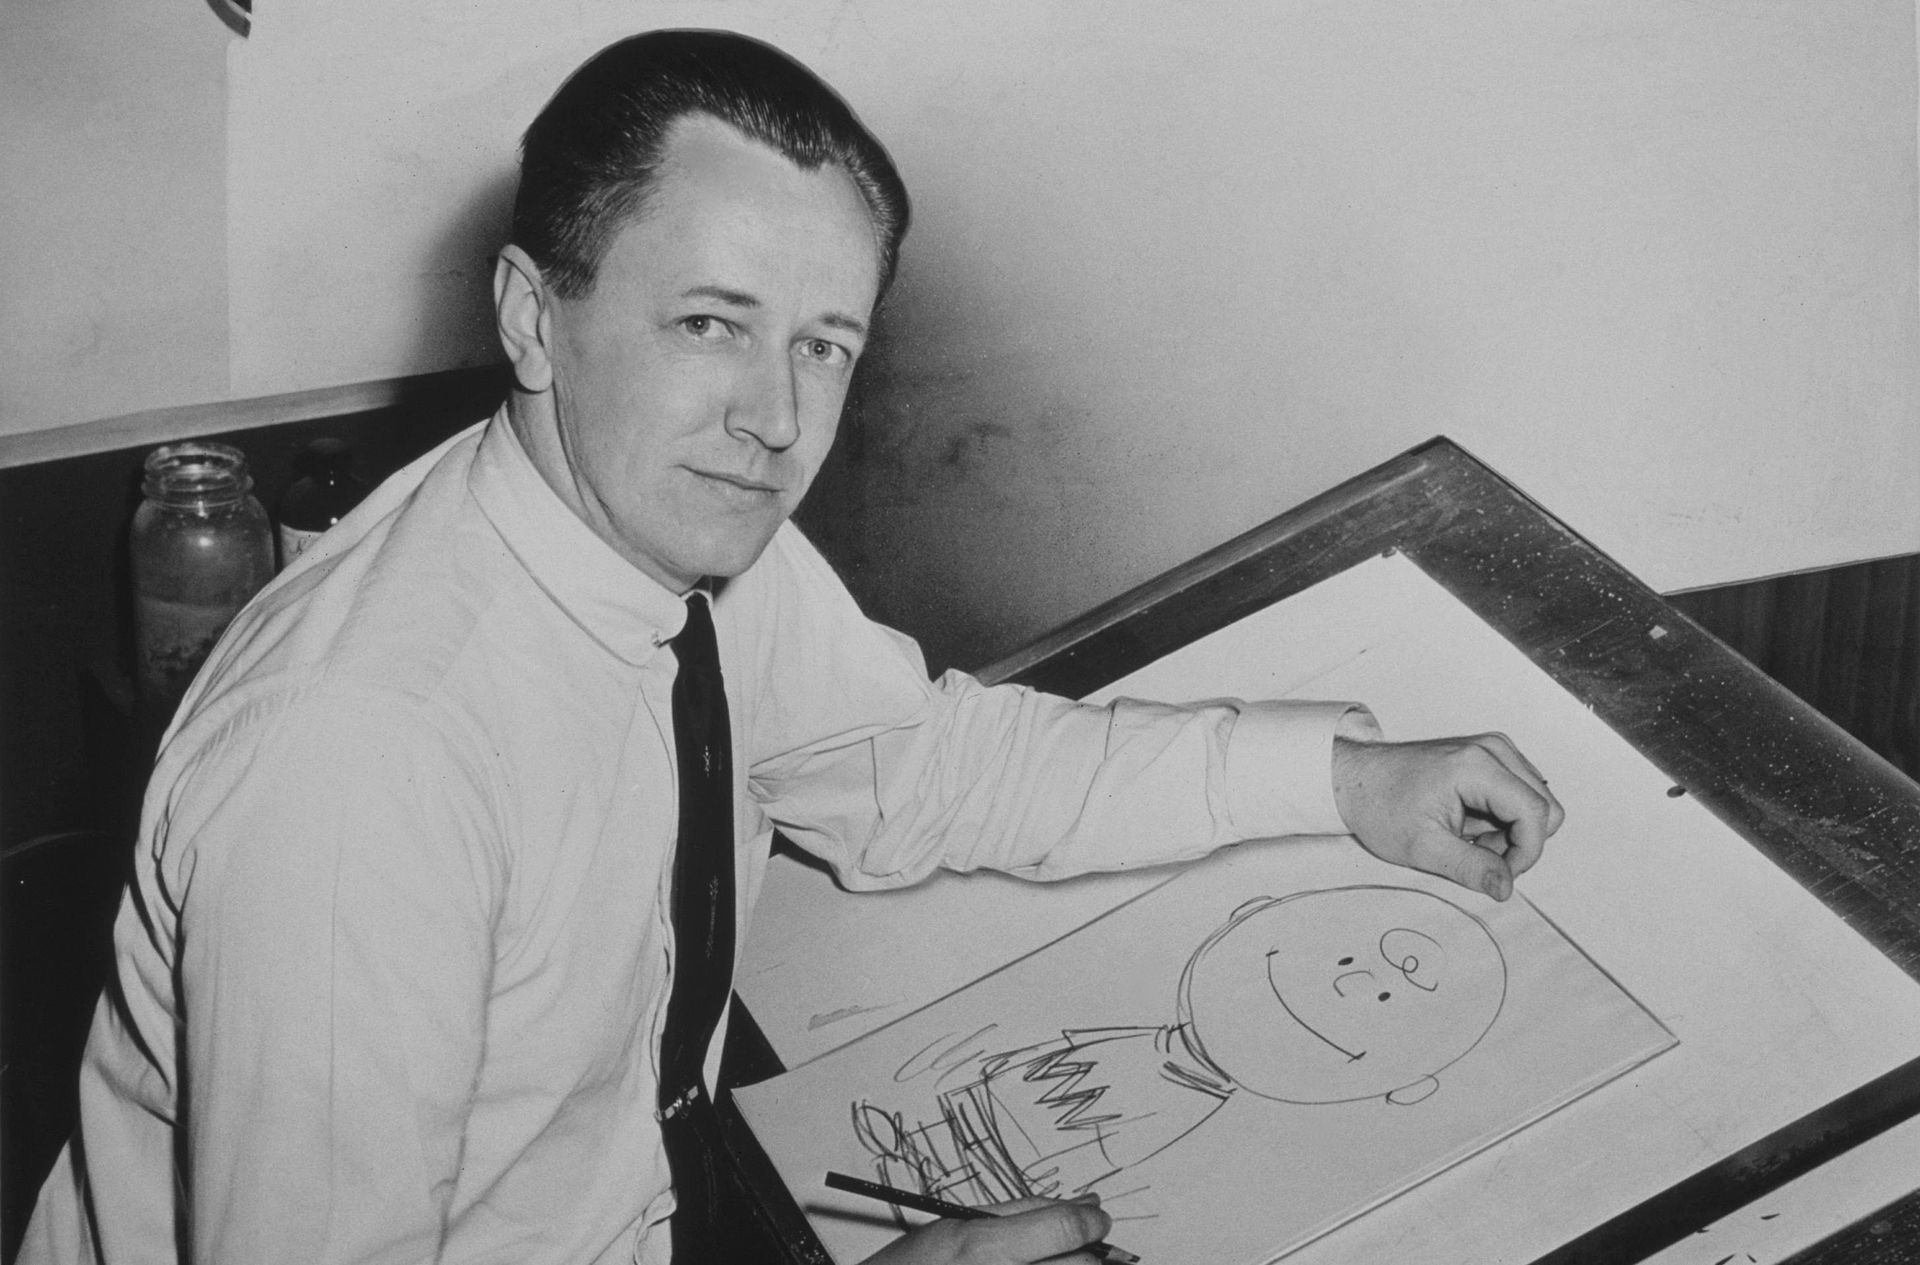 "Peanuts" creator Charles M. Schulz in 1956 | Source: Wikimedia Commons / Roger Higgins, World Telegram staff photographer, Charles Schulz NYWTS, marked as public domain, more details on Wikimedia Commons